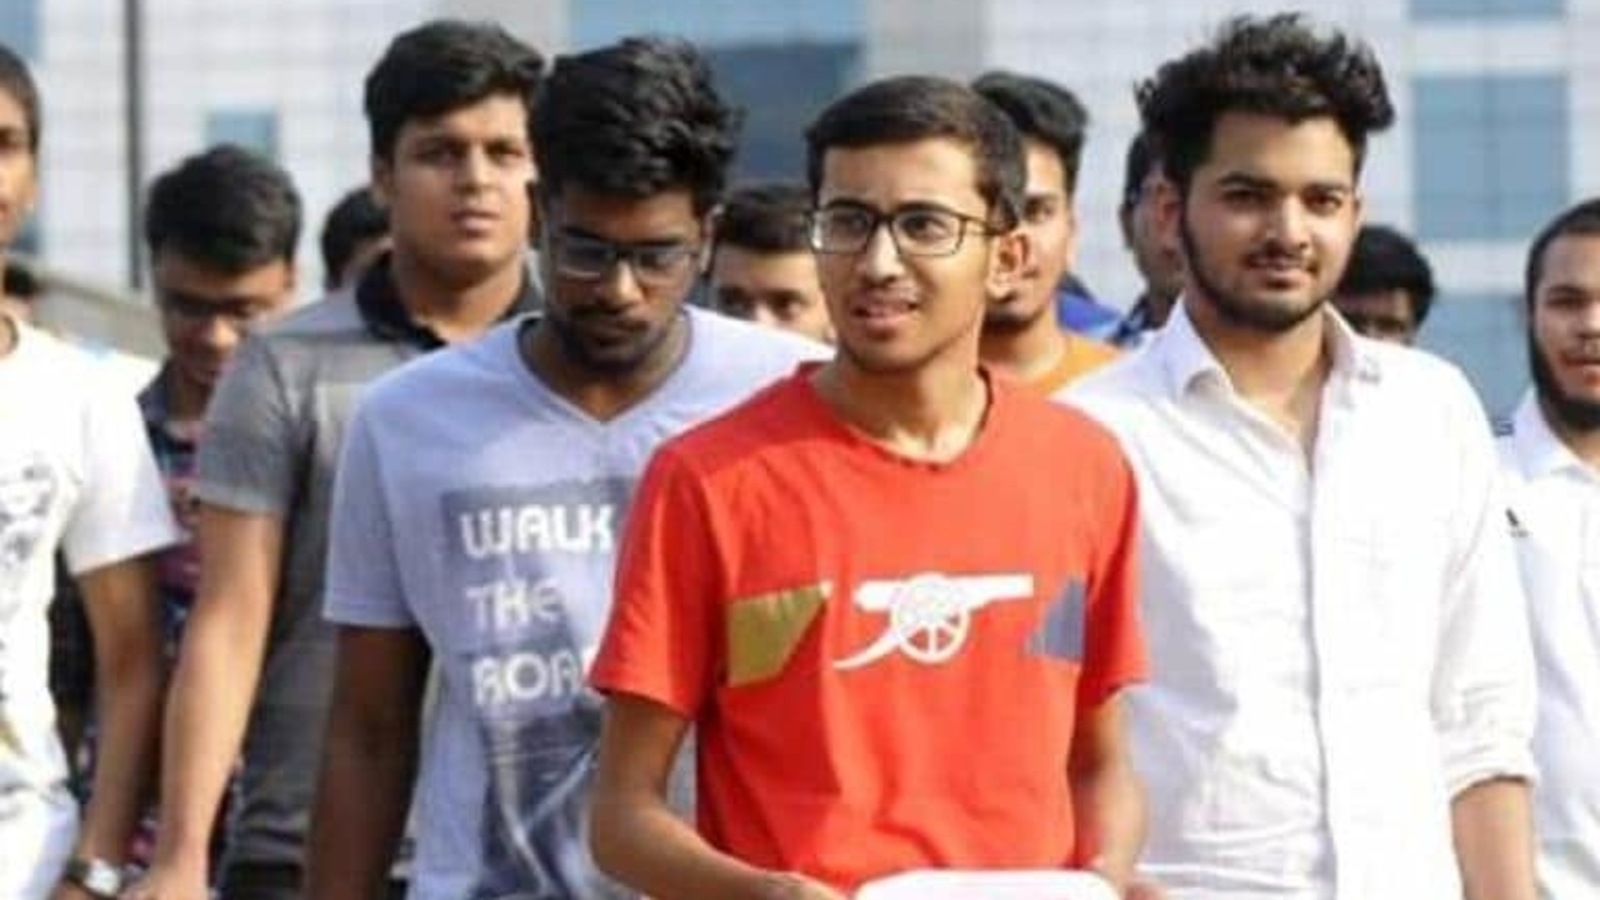 JEE Main admit card for last session exam expected soon